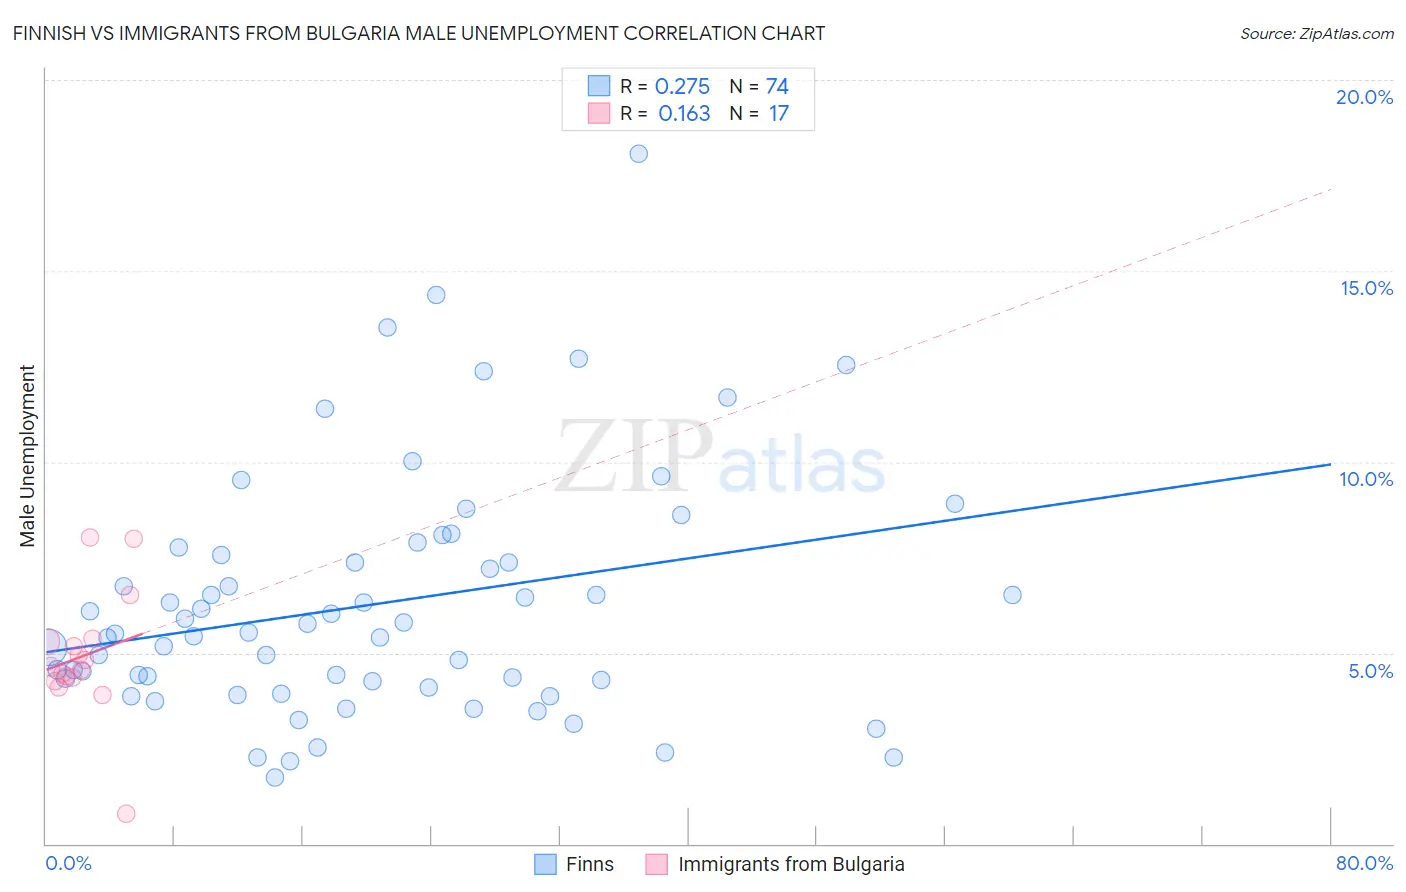 Finnish vs Immigrants from Bulgaria Male Unemployment